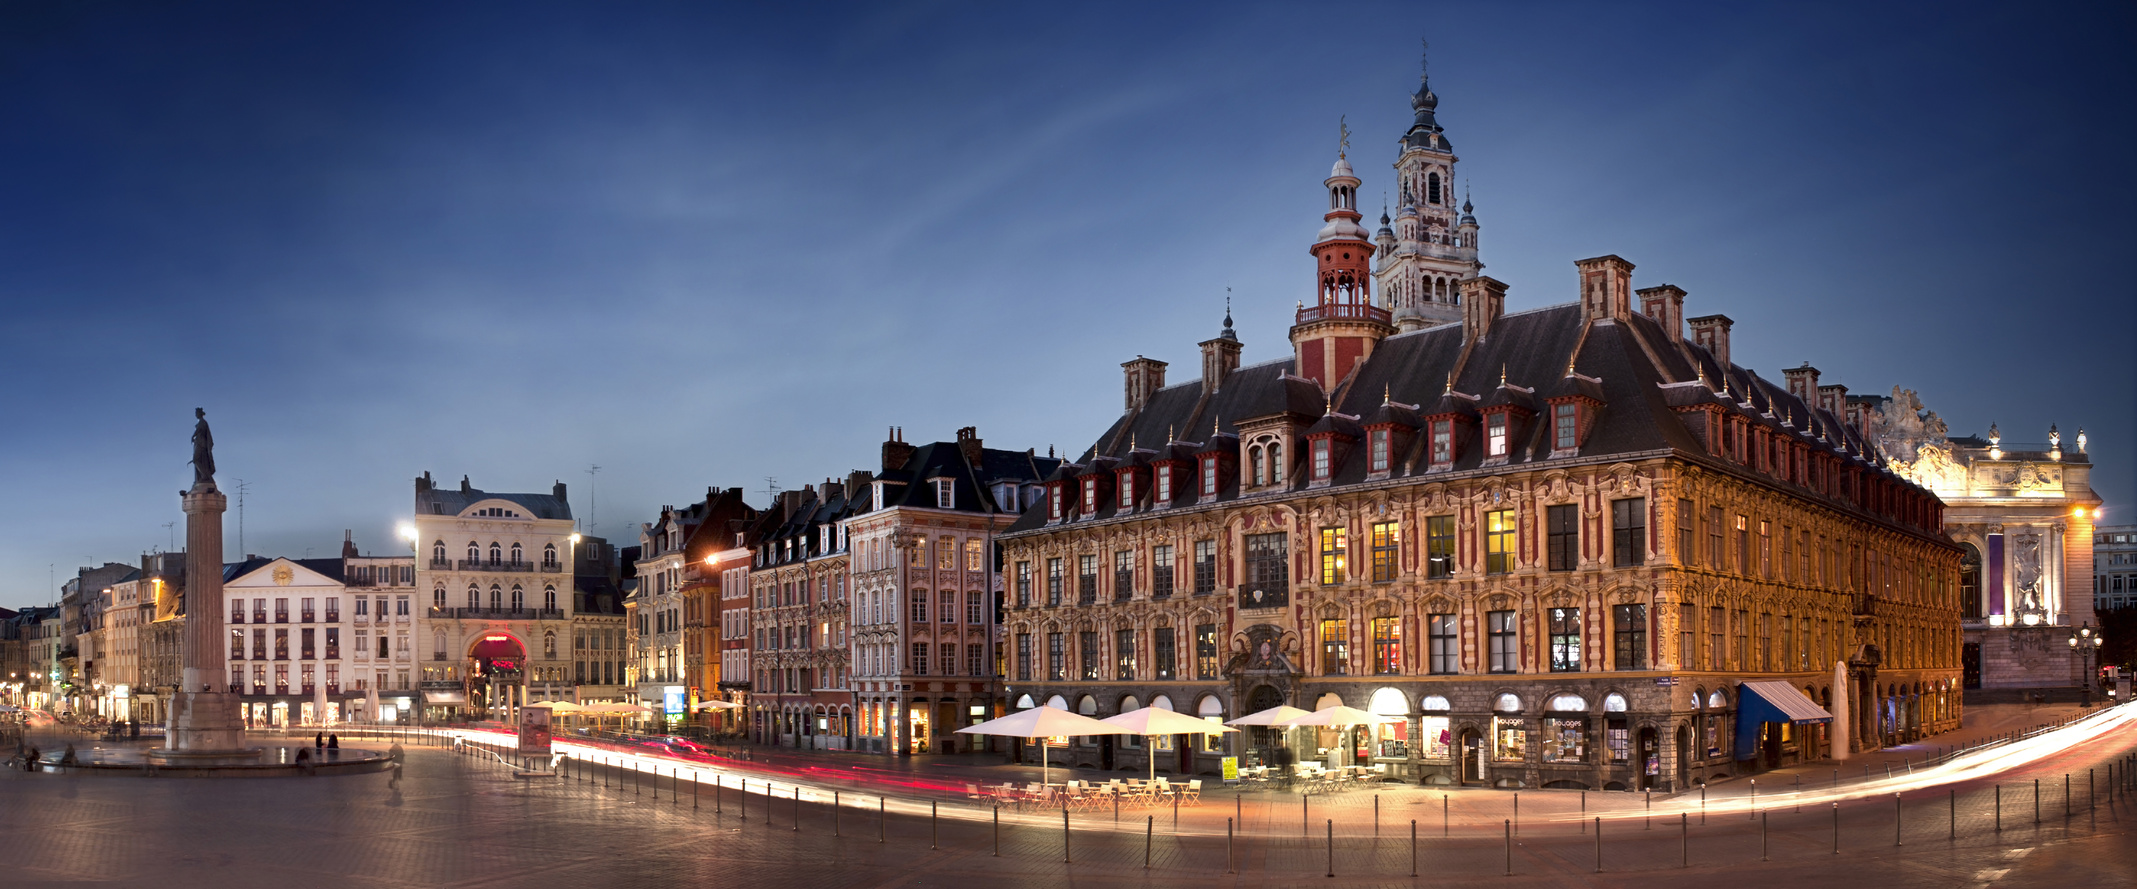 20180529092628-lille-fotolia-45903314-subscription-monthly-m-614b70f0a86f8746724608.jpg